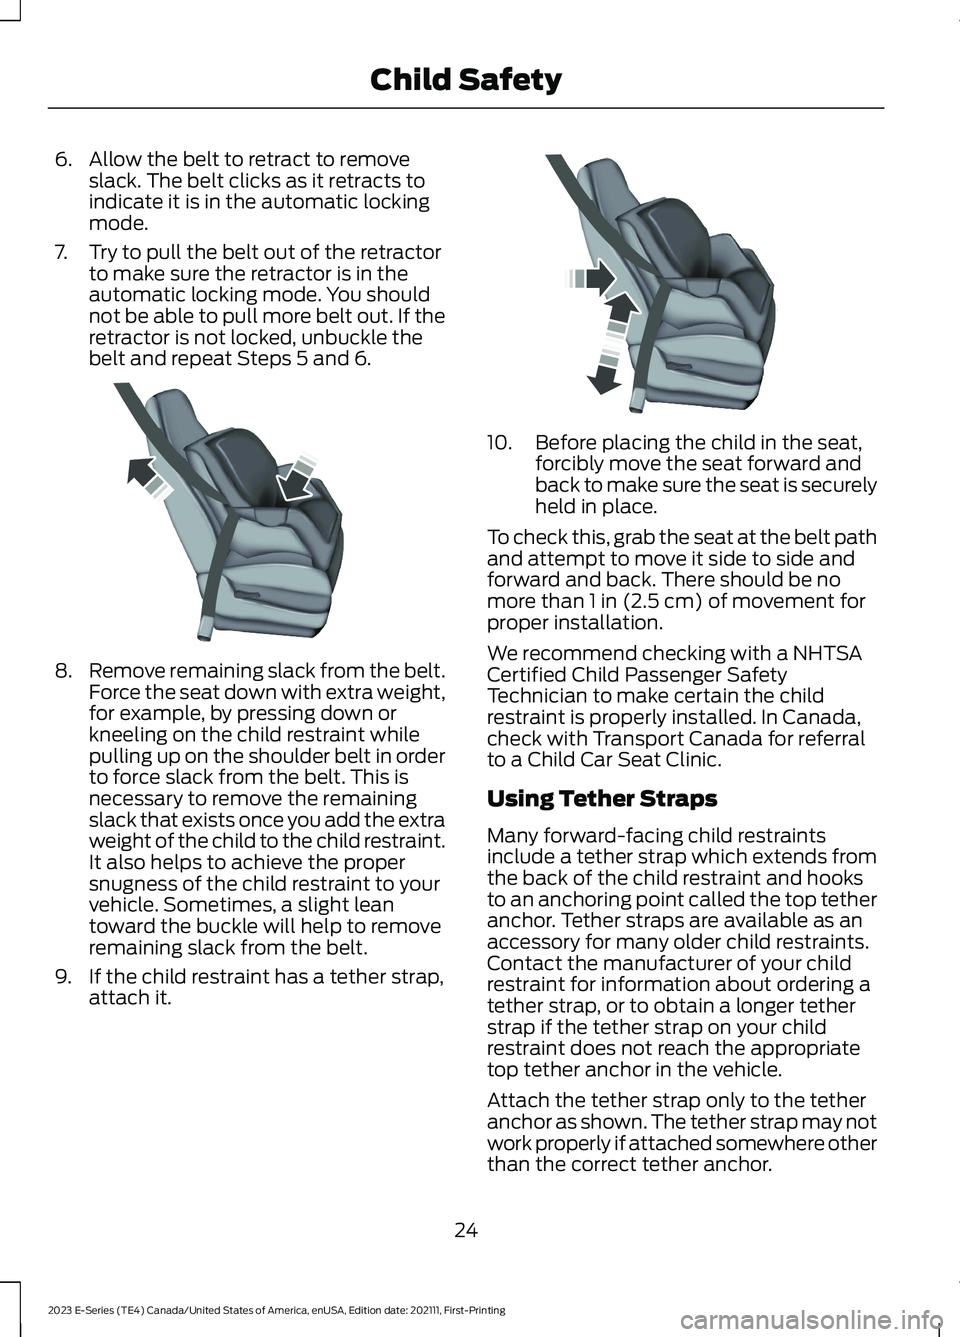 FORD E SERIES 2023  Owners Manual 6.Allow the belt to retract to removeslack. The belt clicks as it retracts toindicate it is in the automatic lockingmode.
7.Try to pull the belt out of the retractorto make sure the retractor is in th